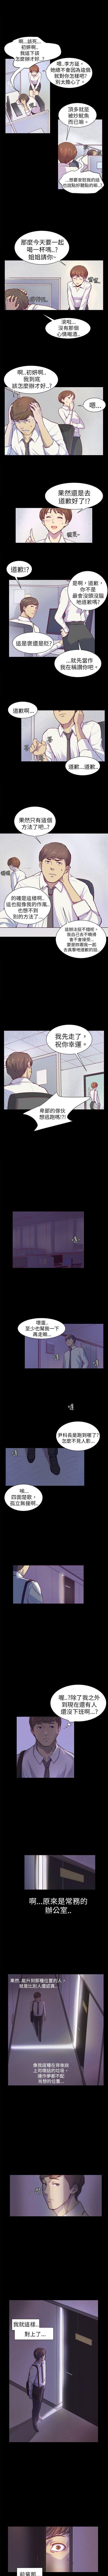 From 斯德哥爾摩症候群 1-40 Compilation - Page 4